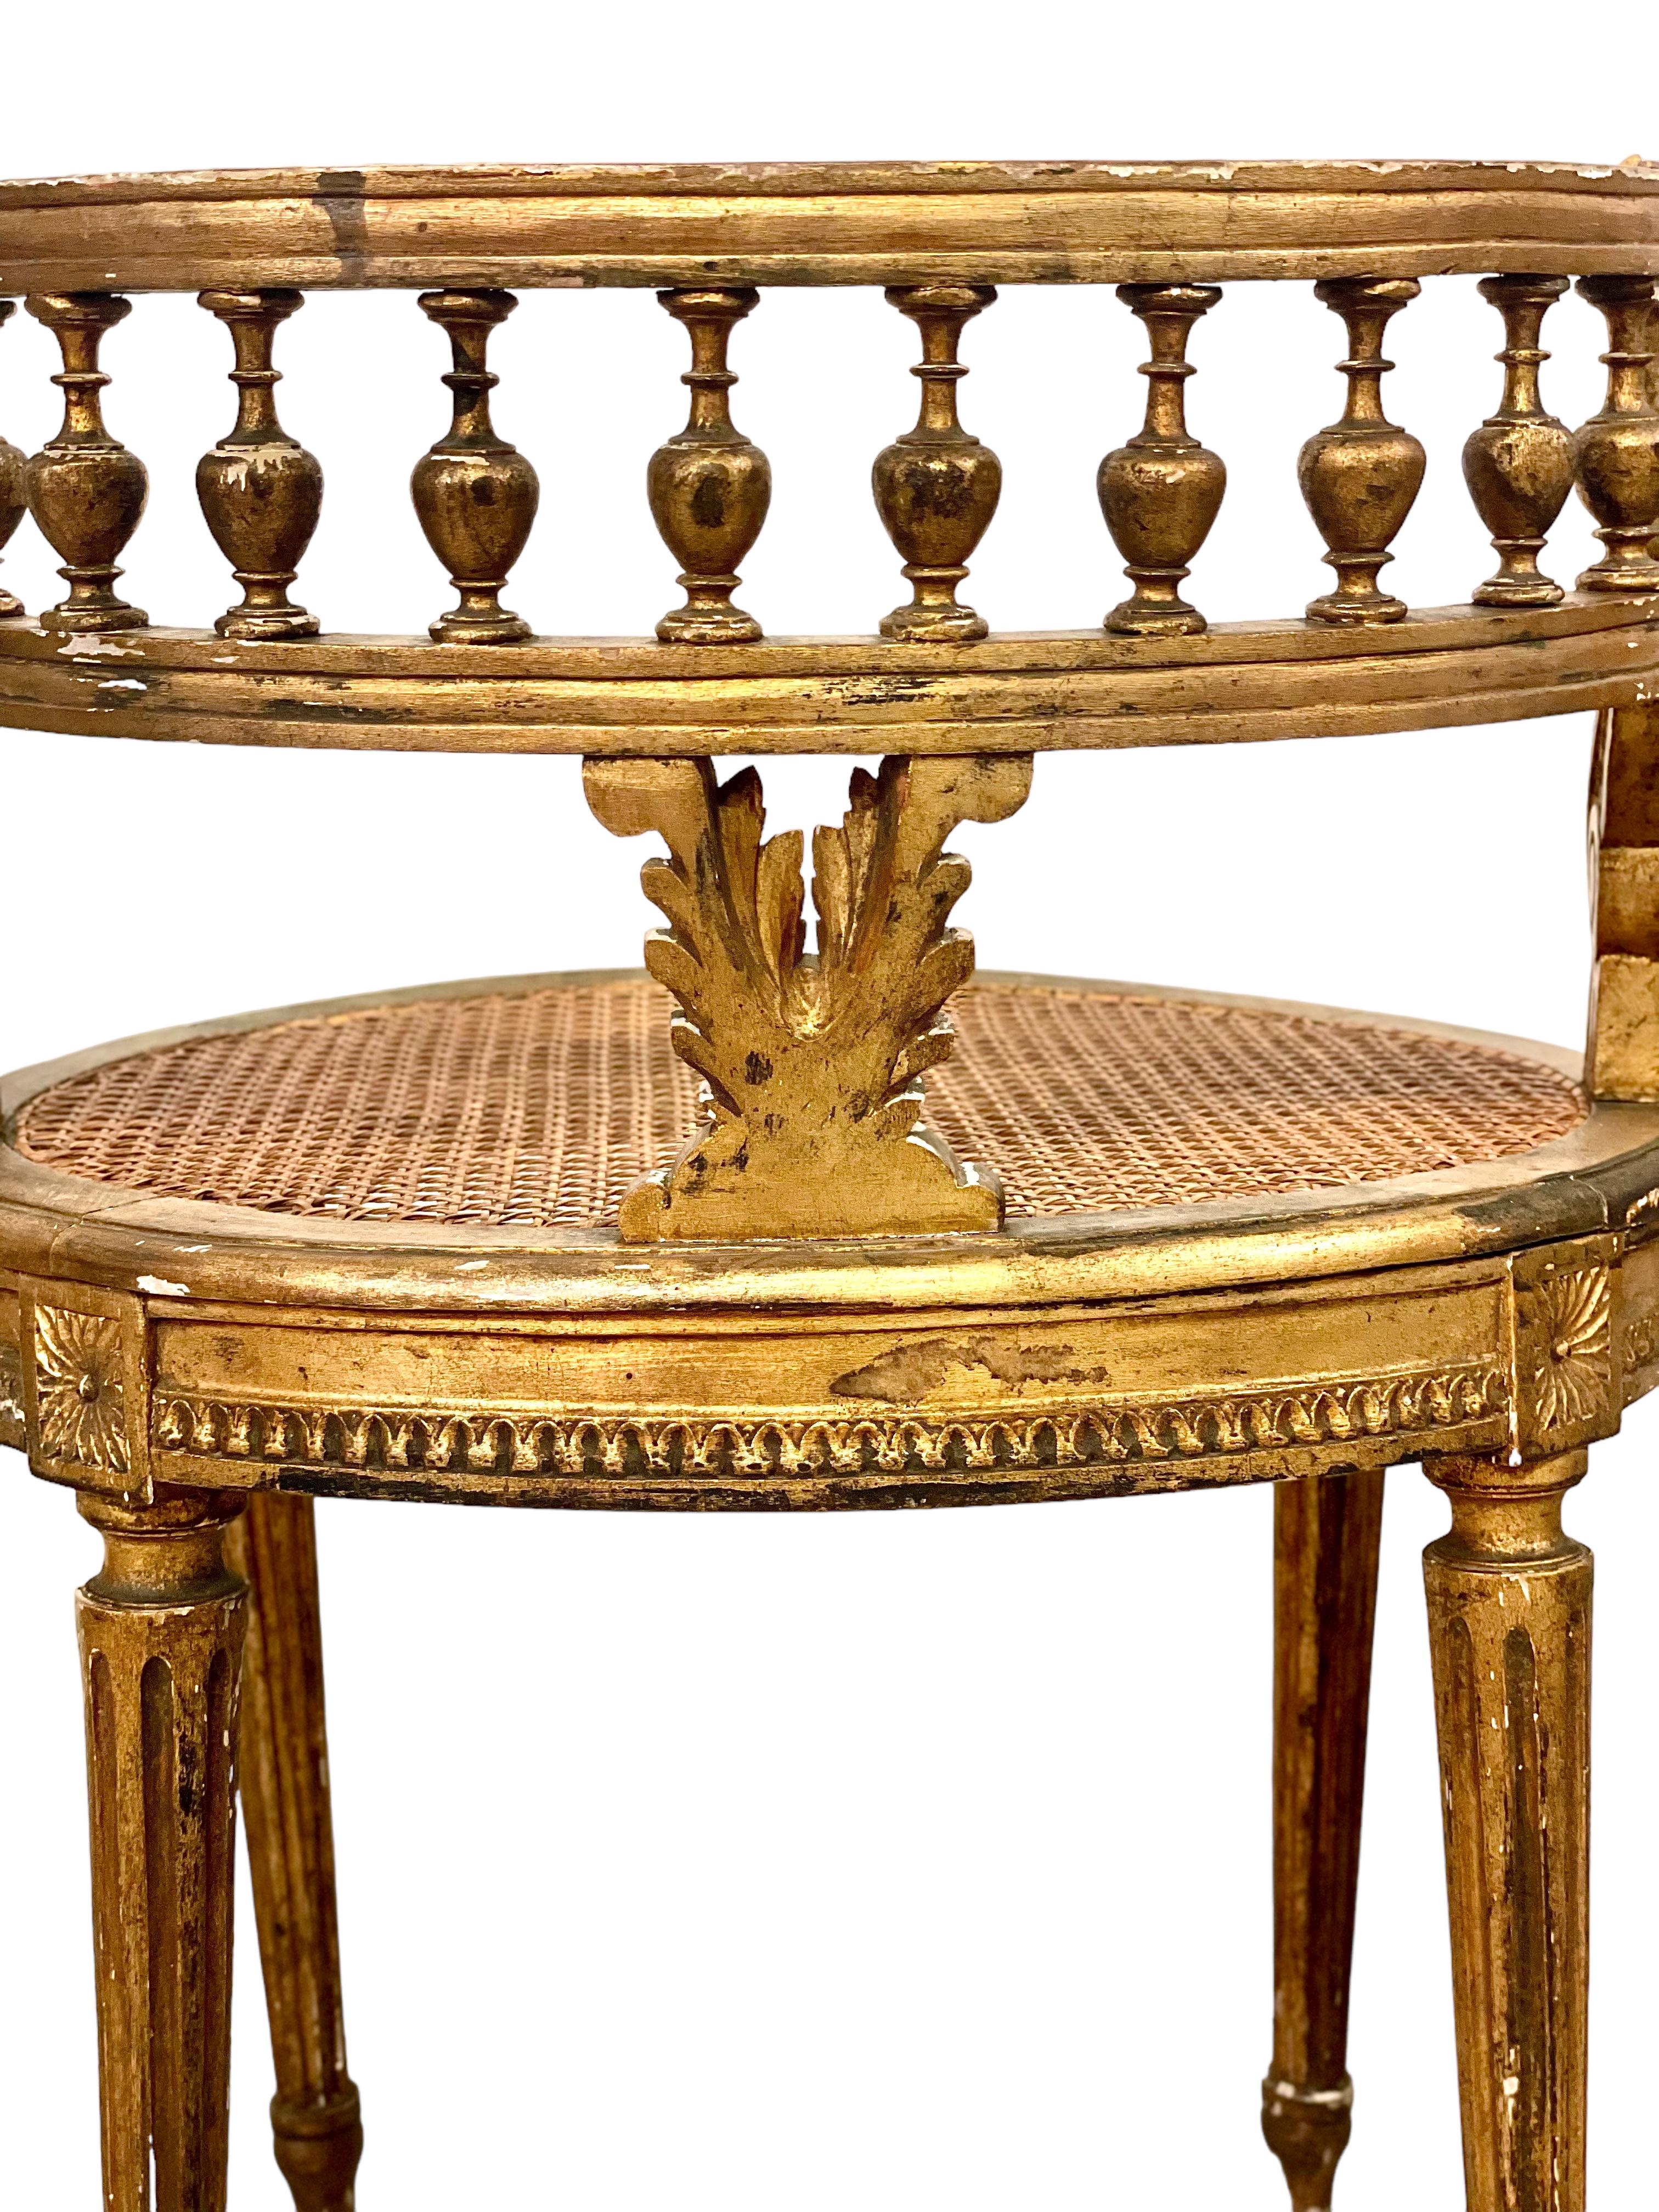 A pair of exquisite Louis XVI style vanity chairs, with lightweight, caned oval- shaped seats and extravagant wraparound gallery backrests. These chairs are wonderful examples of French craftsmanship, featuring intricate carving in the form of